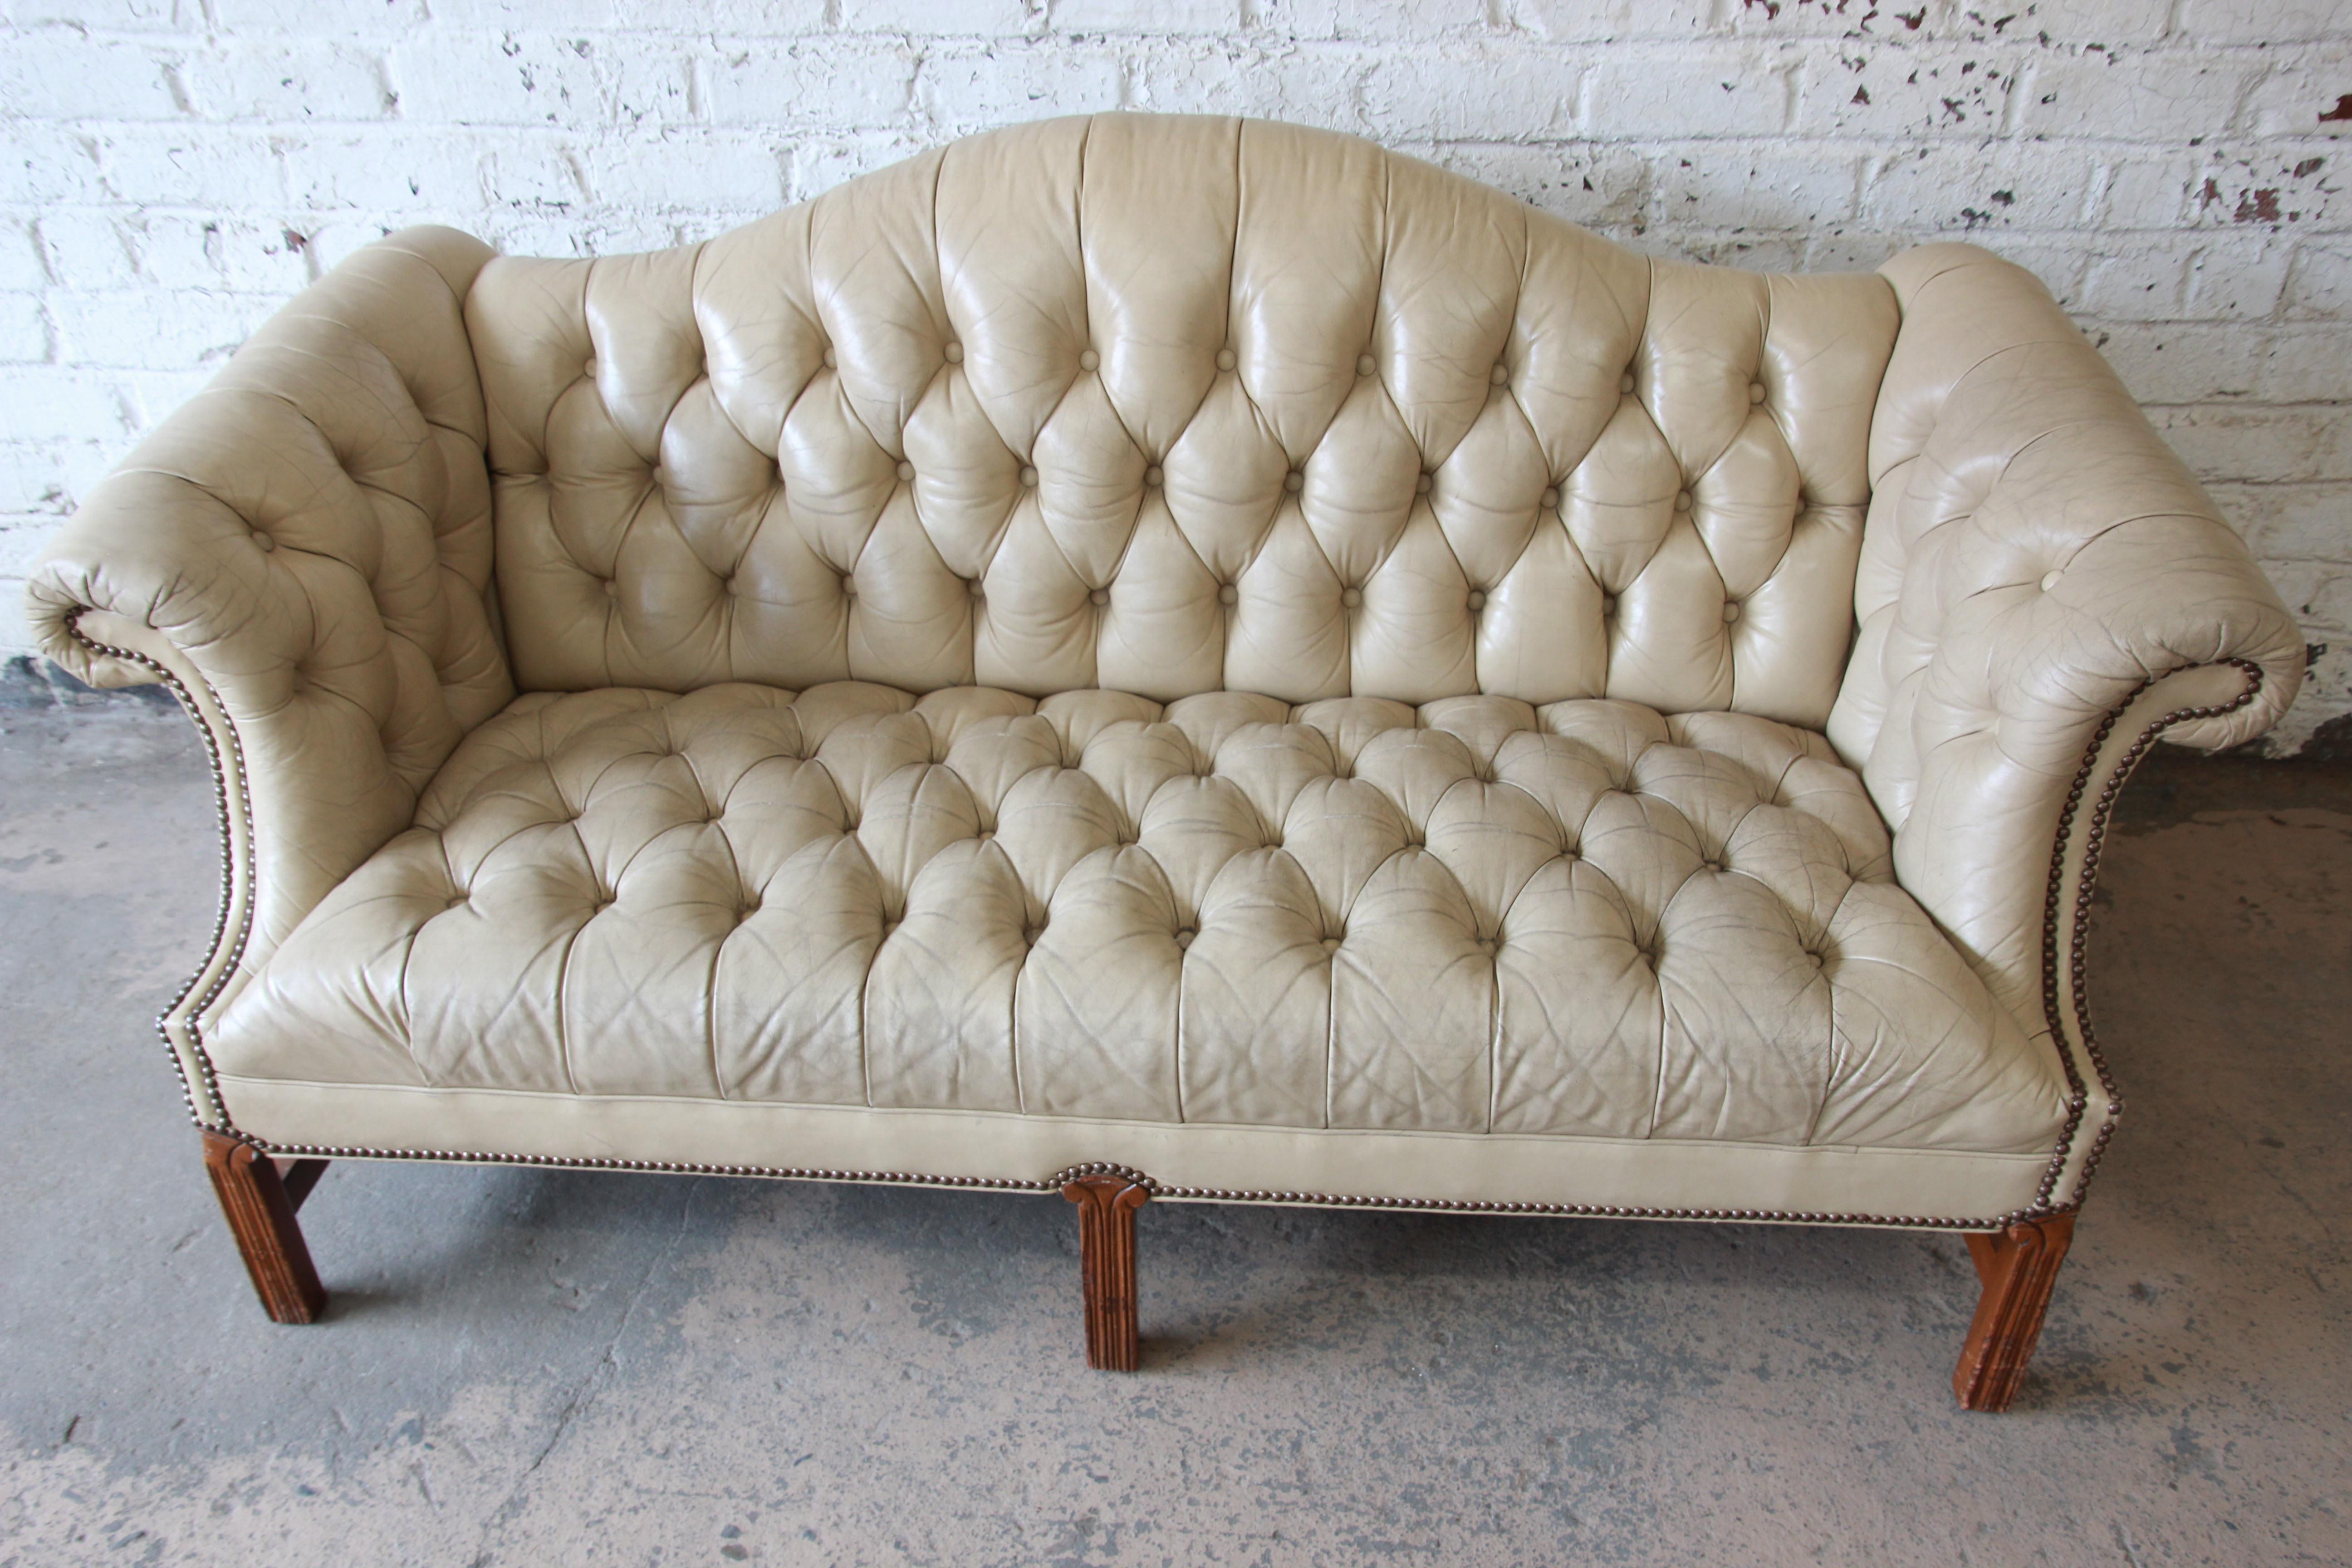 20th Century Vintage Tufted Tan Leather Chesterfield Sofa